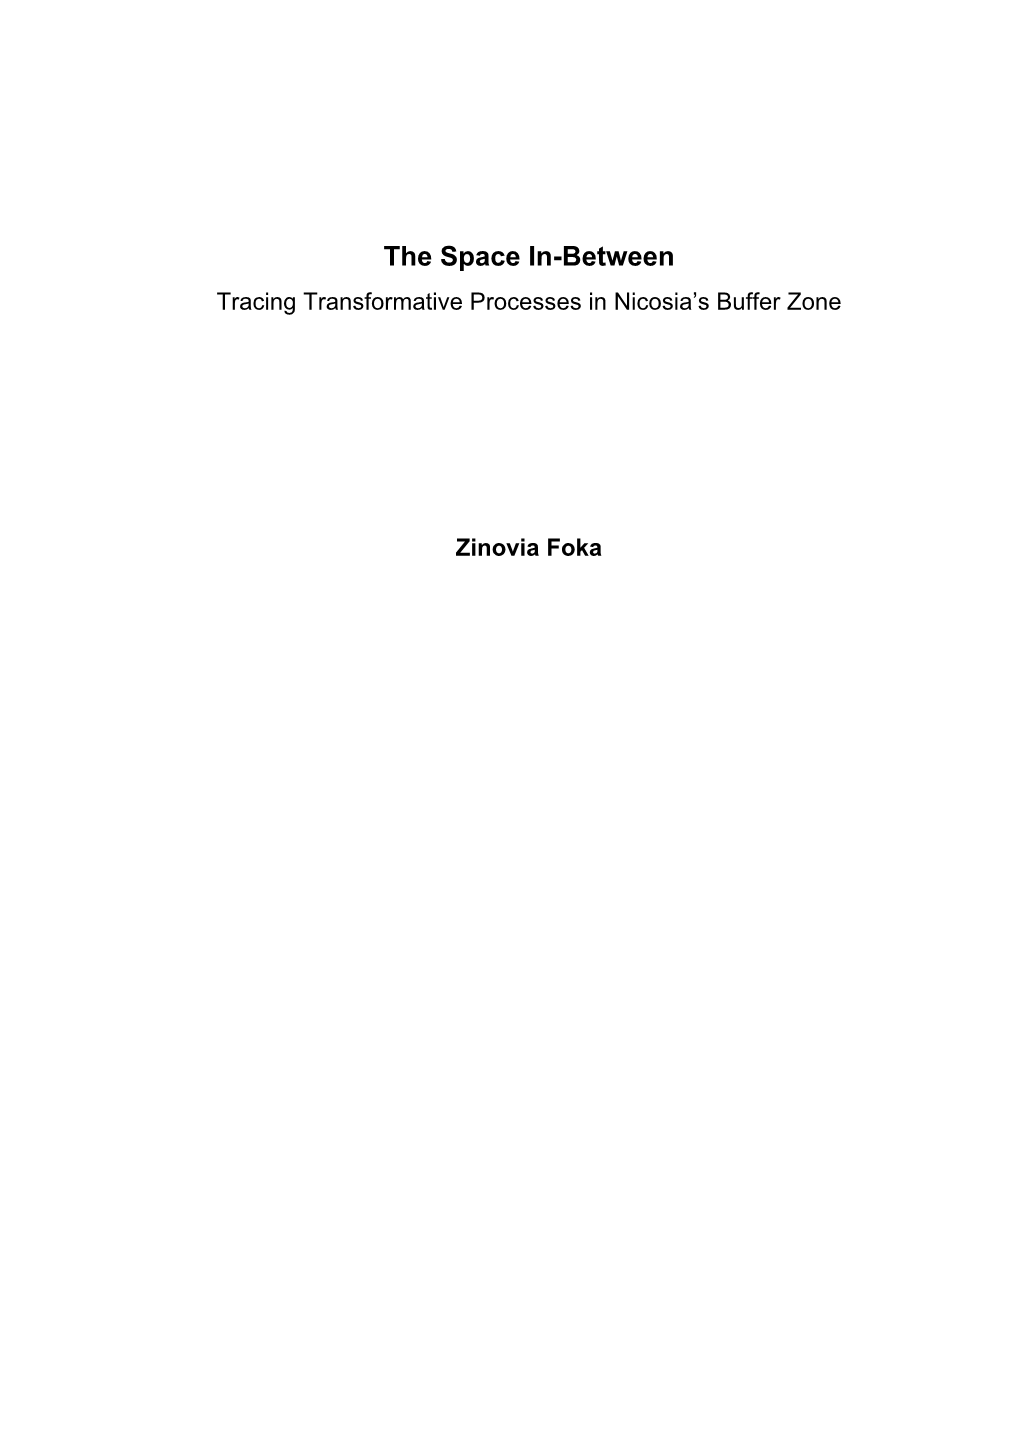 The Space In-Between: Tracing Transformative Processes In